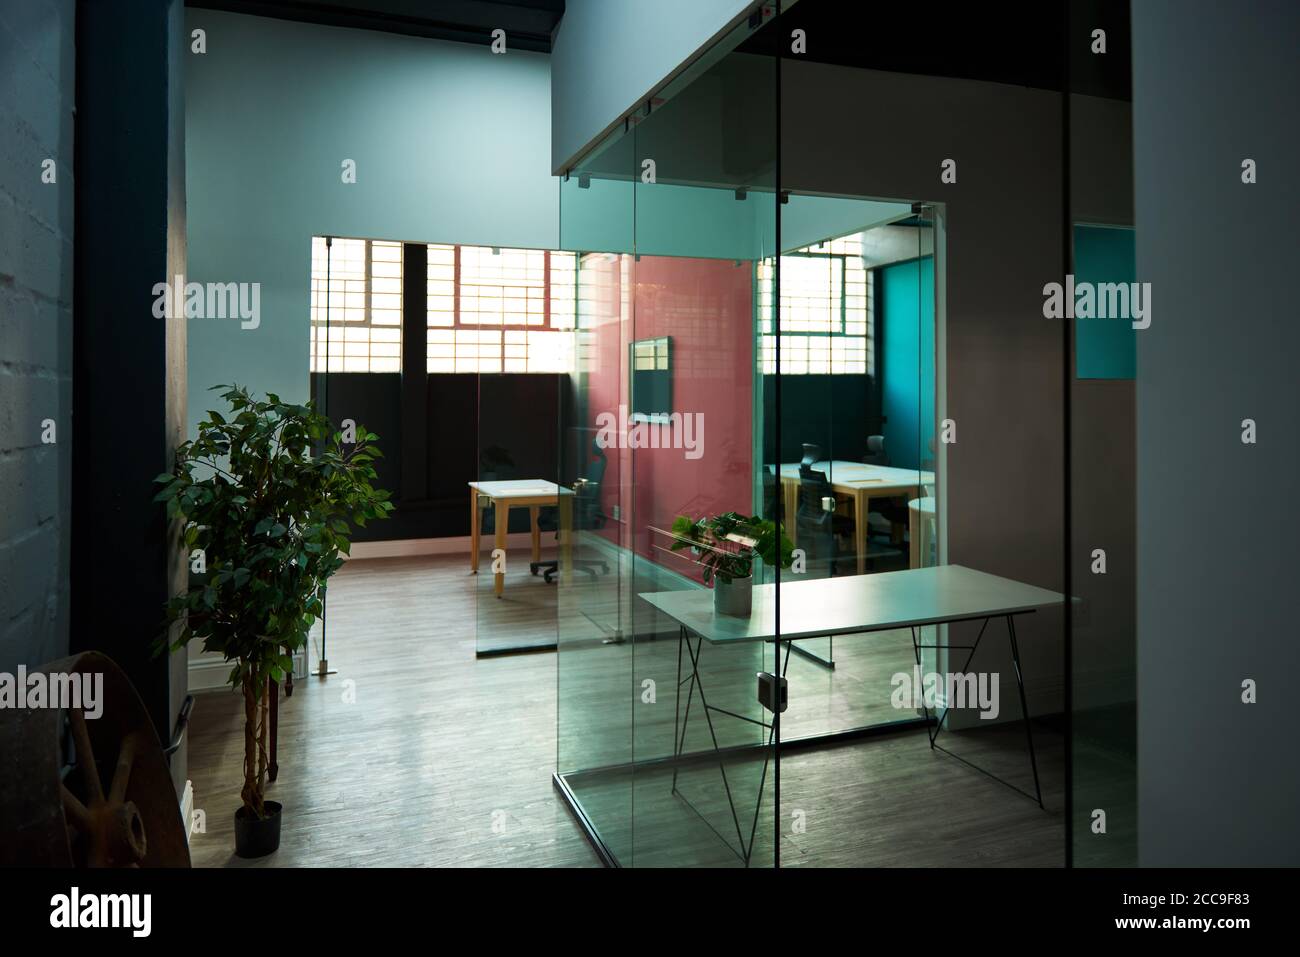 Empty offices in a shared workspace after business hours Stock Photo